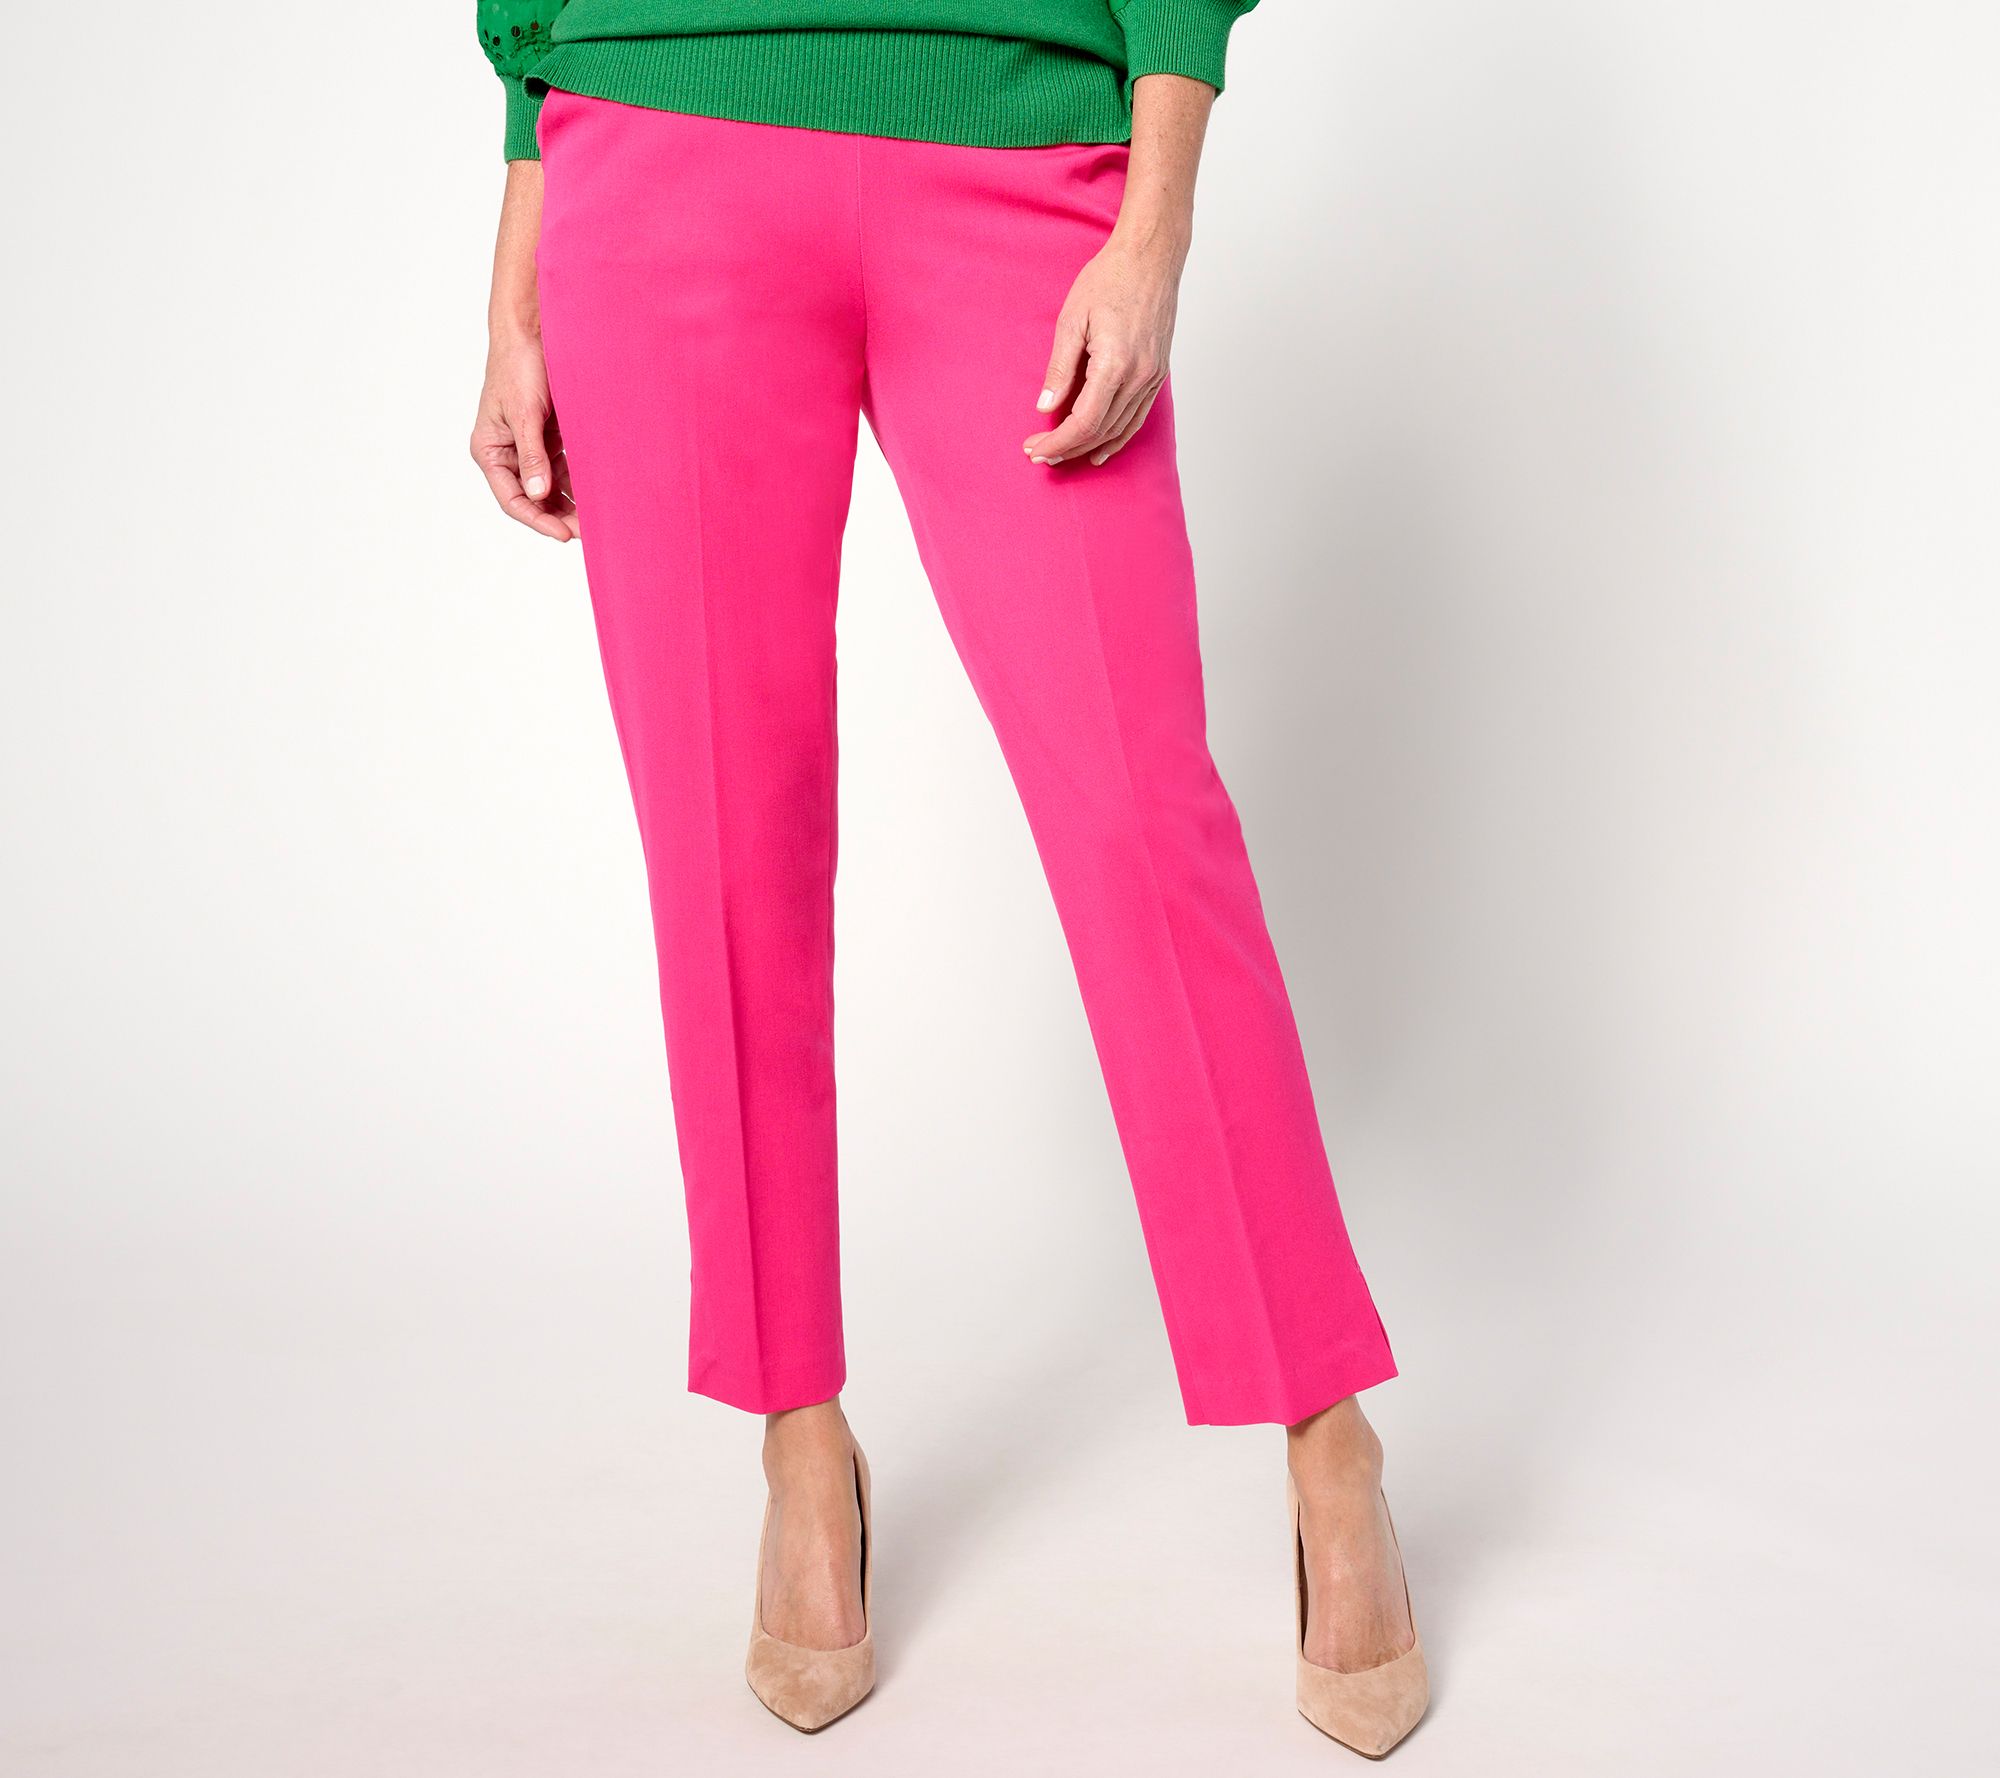 Clothing & Shoes - Bottoms - Pants - Isaac Mizrahi New York Slim 5-Pocket  Pull On Ponte Ankle Pant - Online Shopping for Canadians